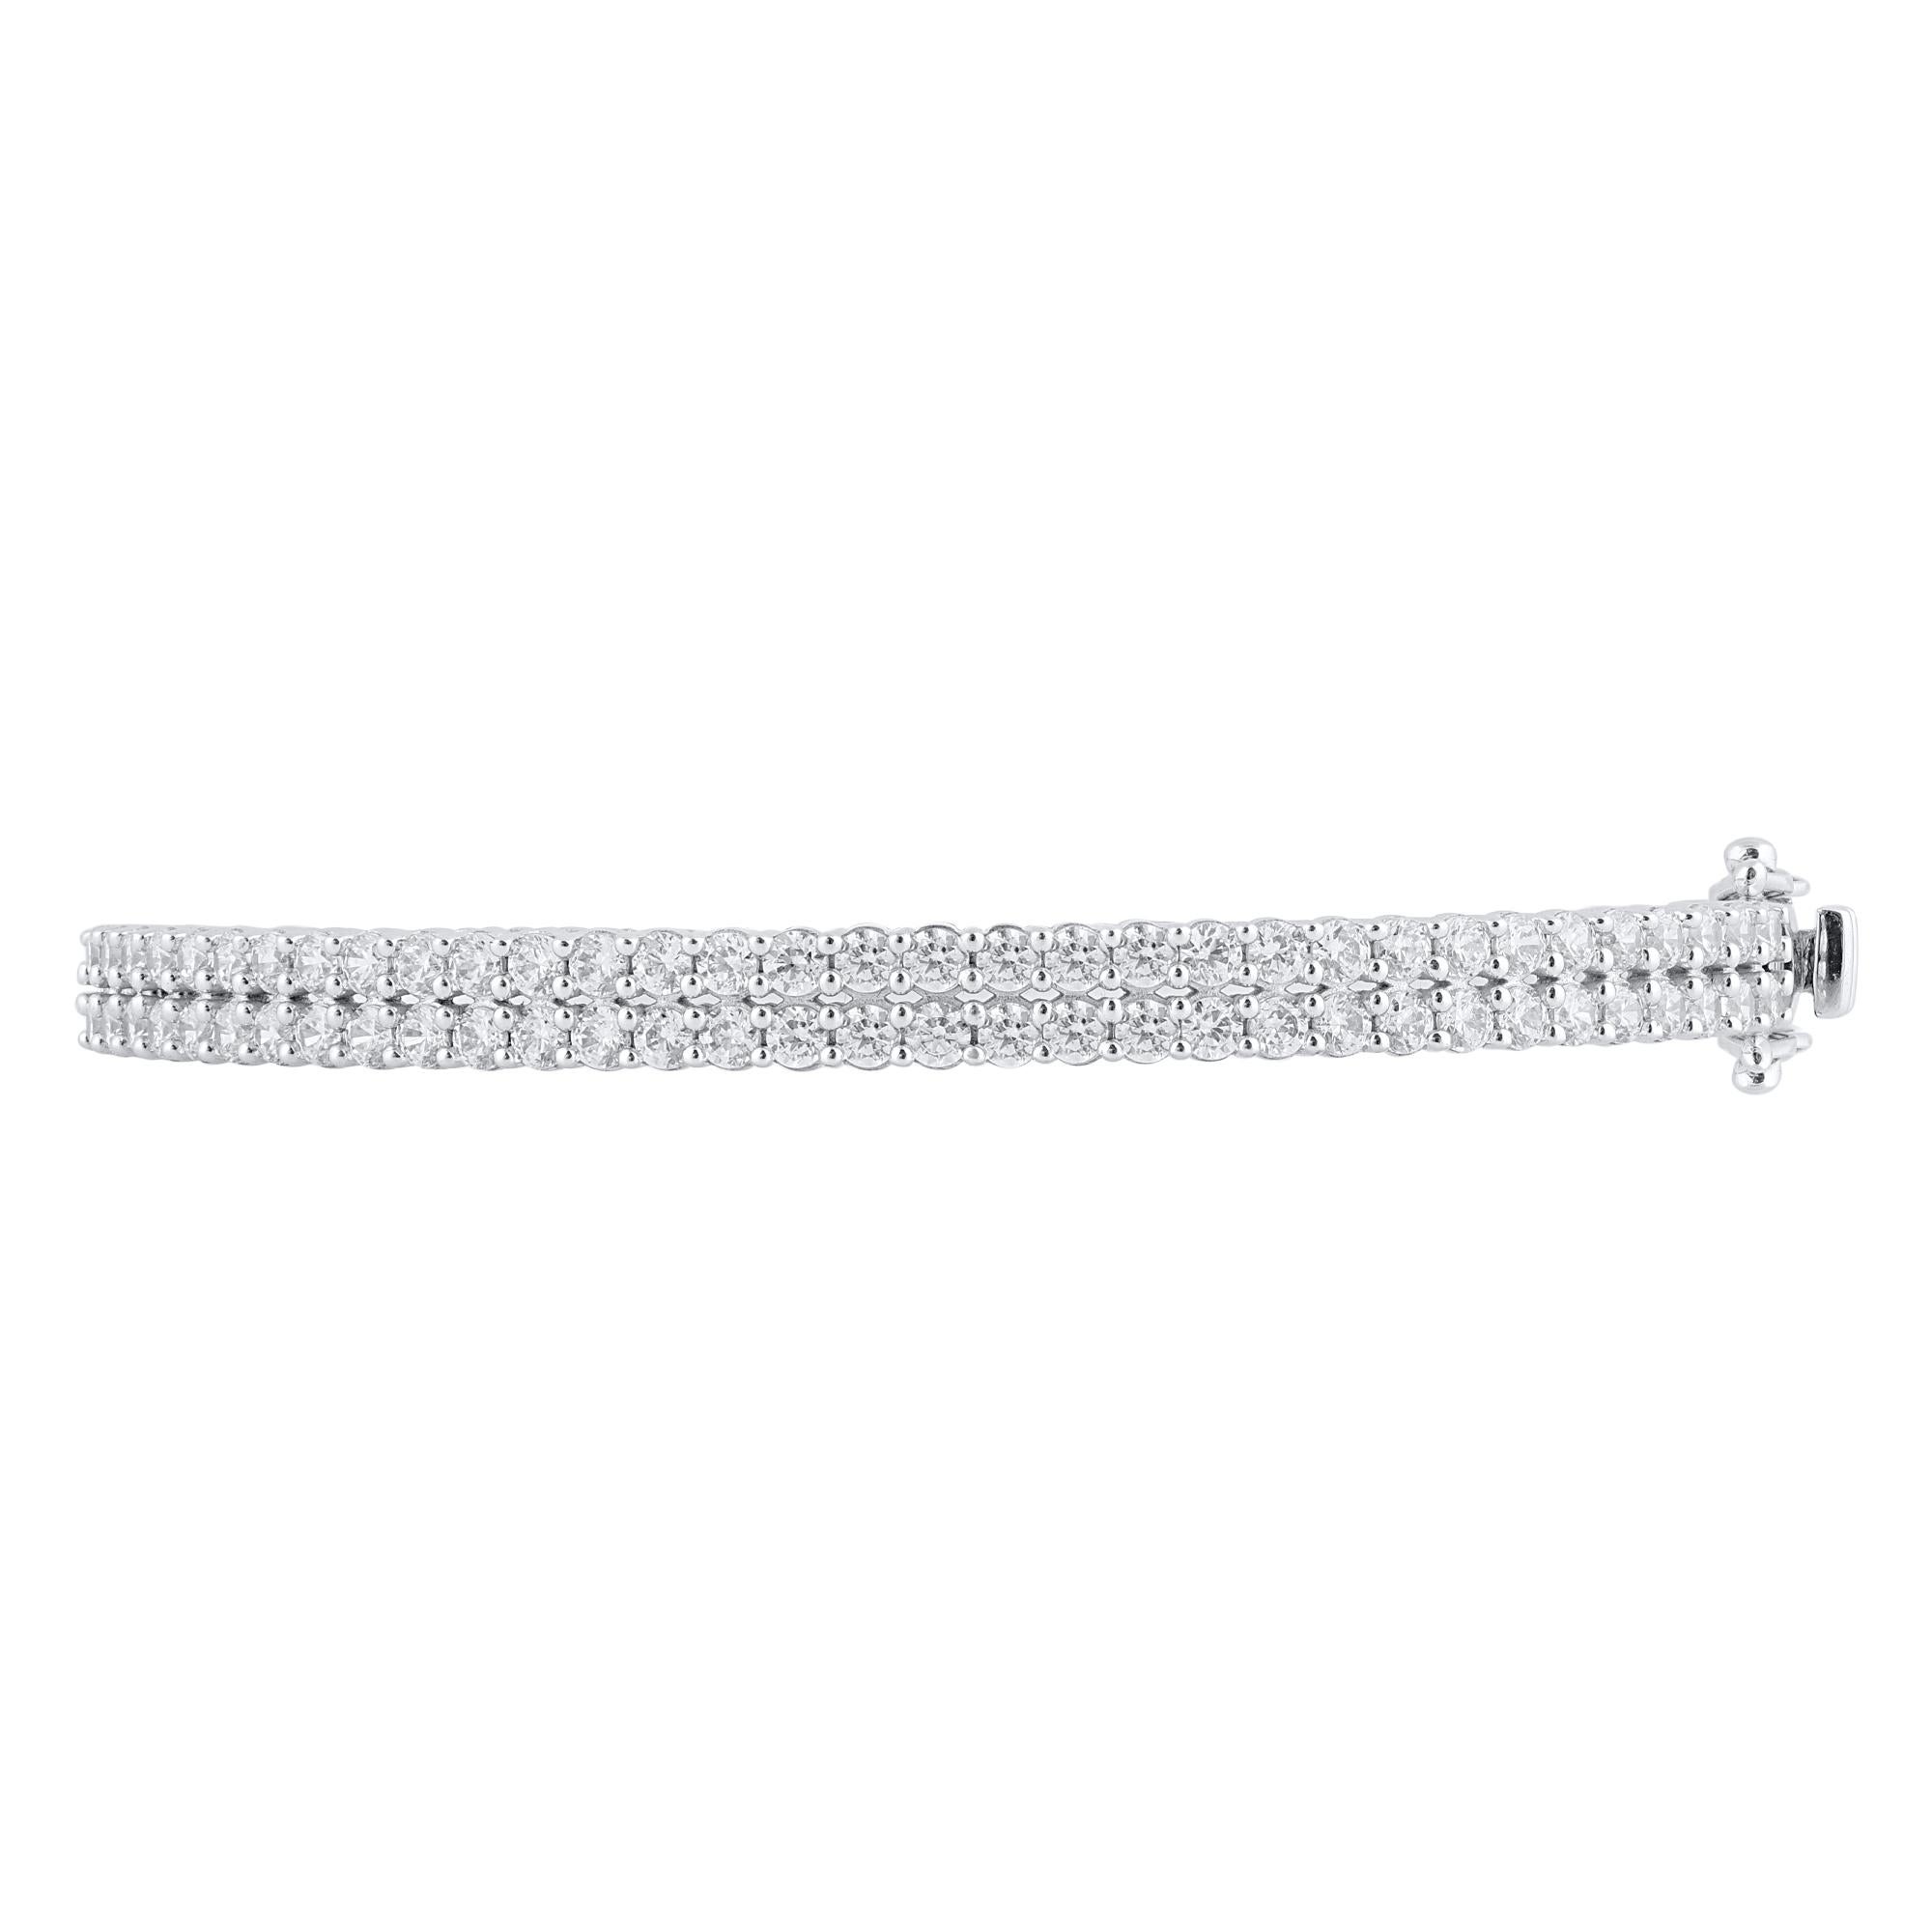 Classic and sophisticated, this diamond bangle bracelet pairs well with any attire.
This Shimmering bangle features 66 rounds natural diamonds in prong setting and crafted 18 kt white gold. Diamonds are graded H-I color, I2 clarity. 

